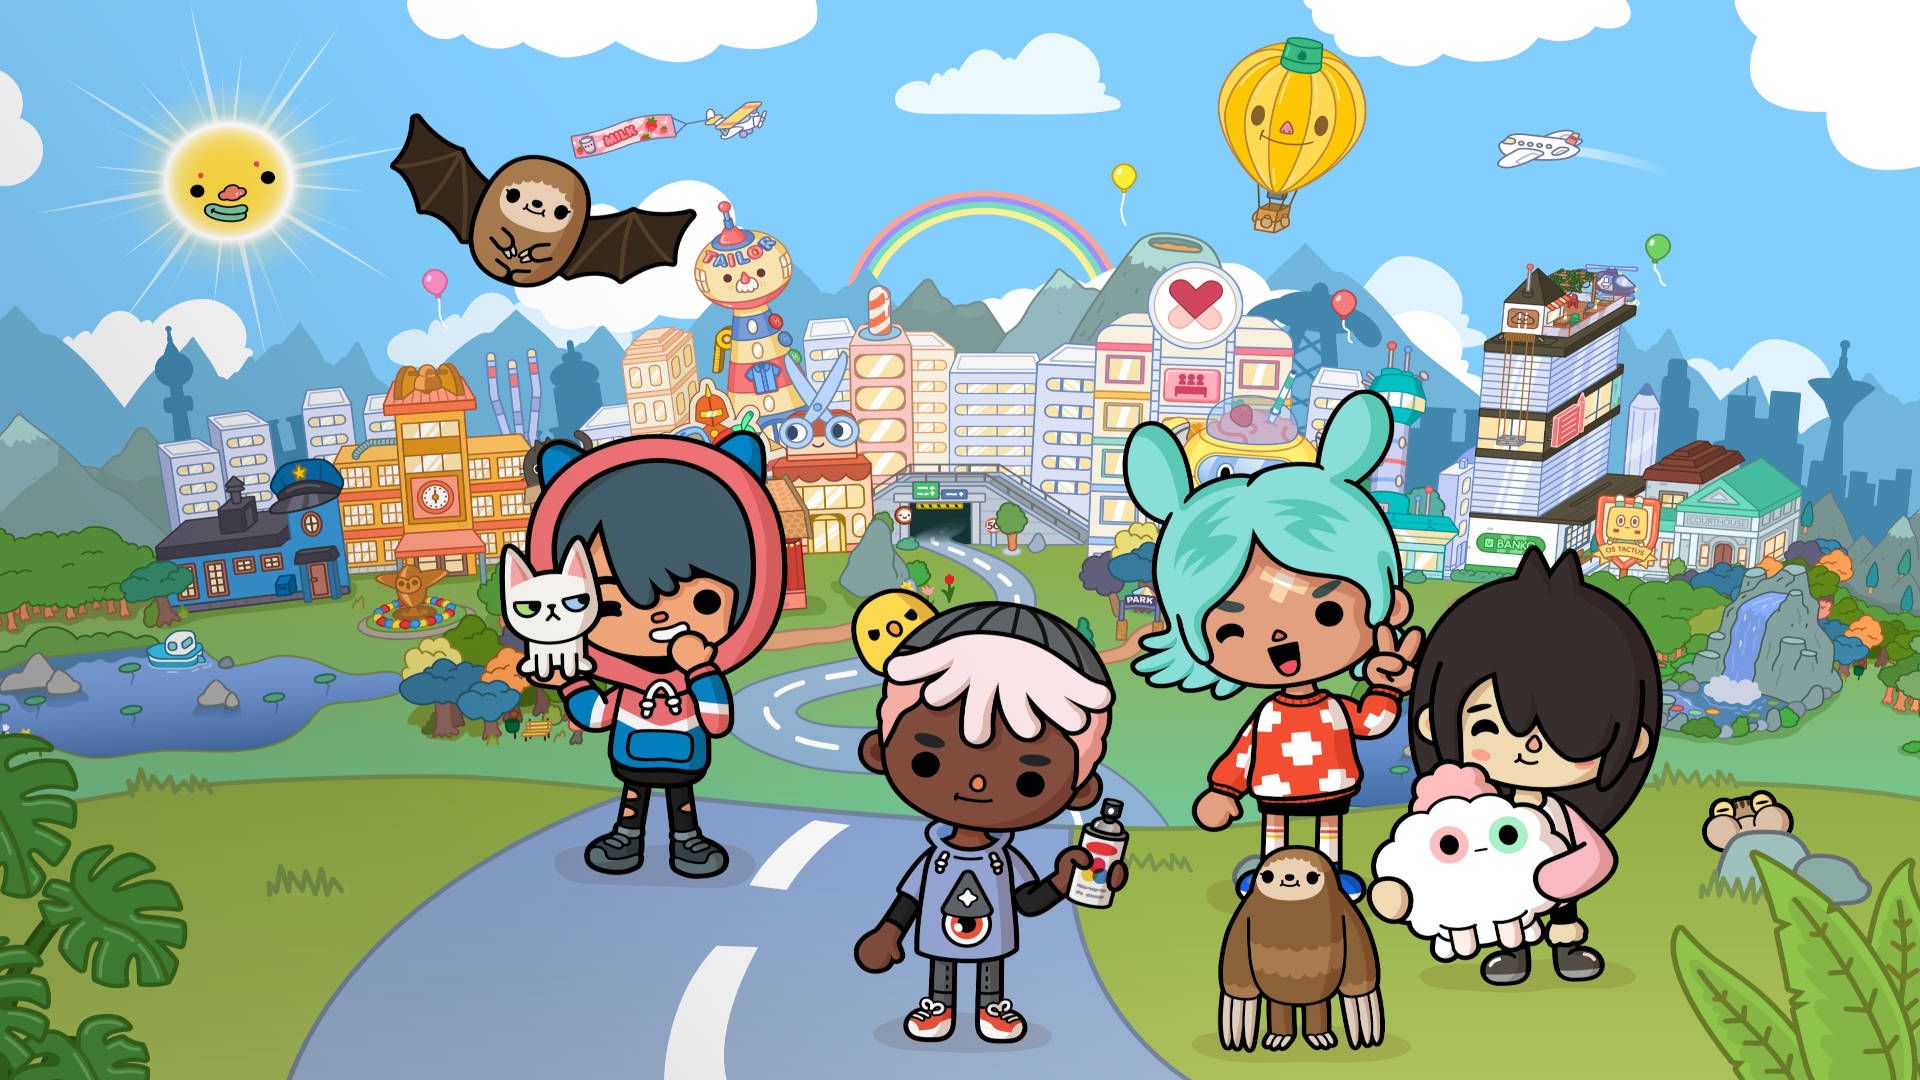 Toca Life World APK guide: how to download on Android, iOS, and PC